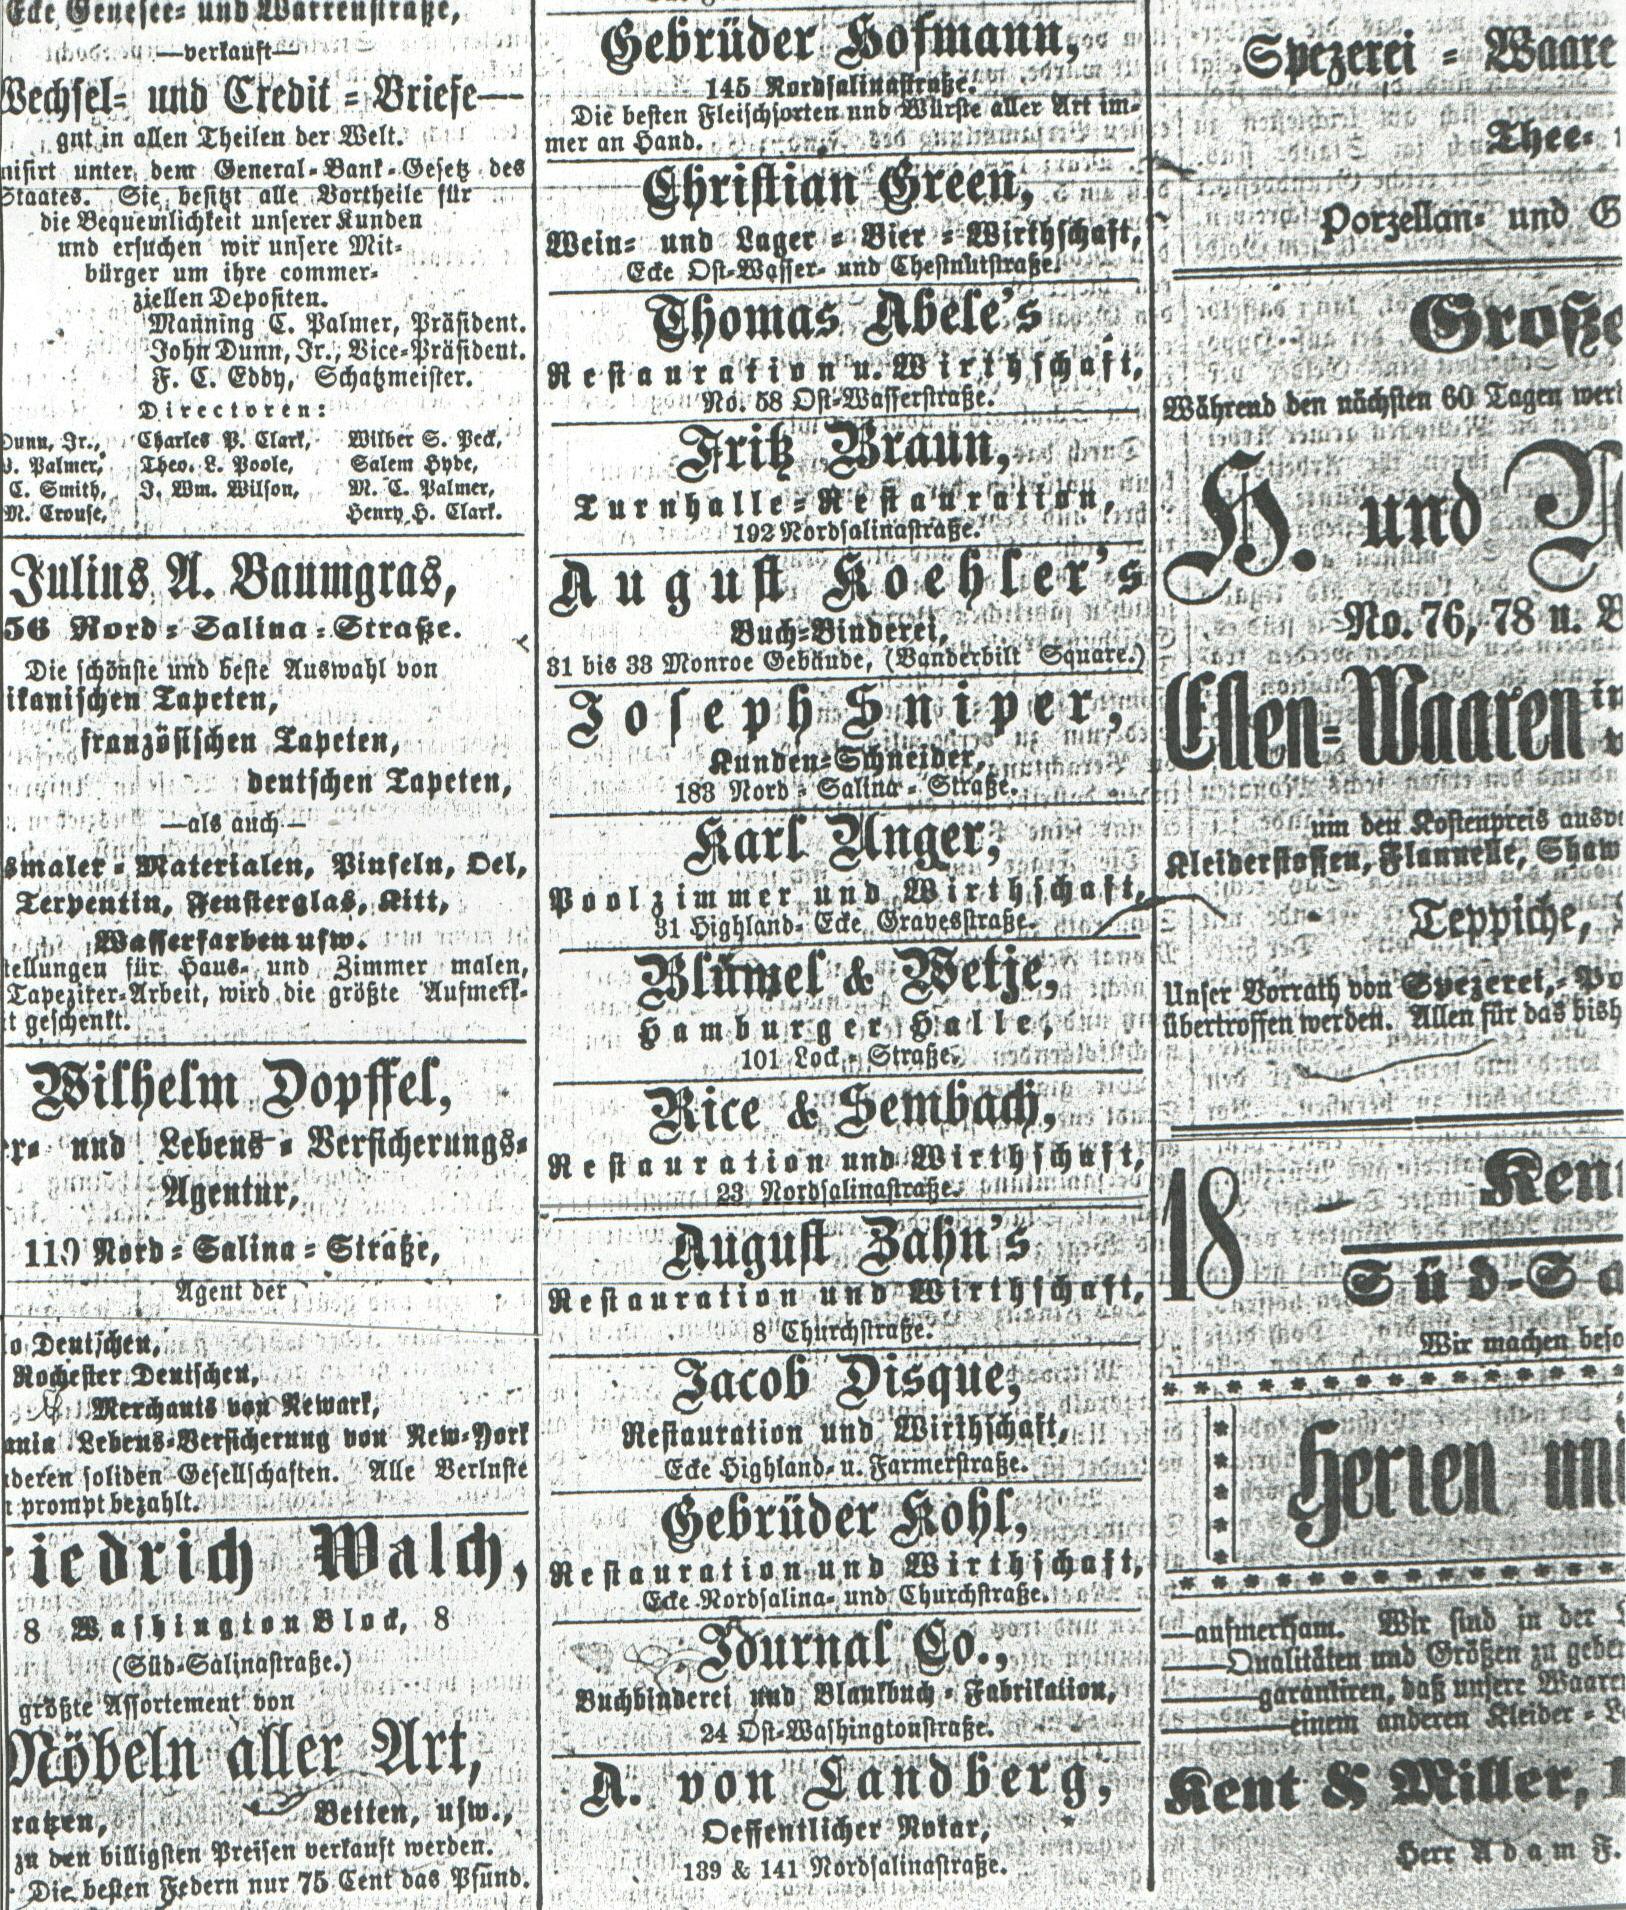 ads from the Syracuse Union, 14 
January 1886